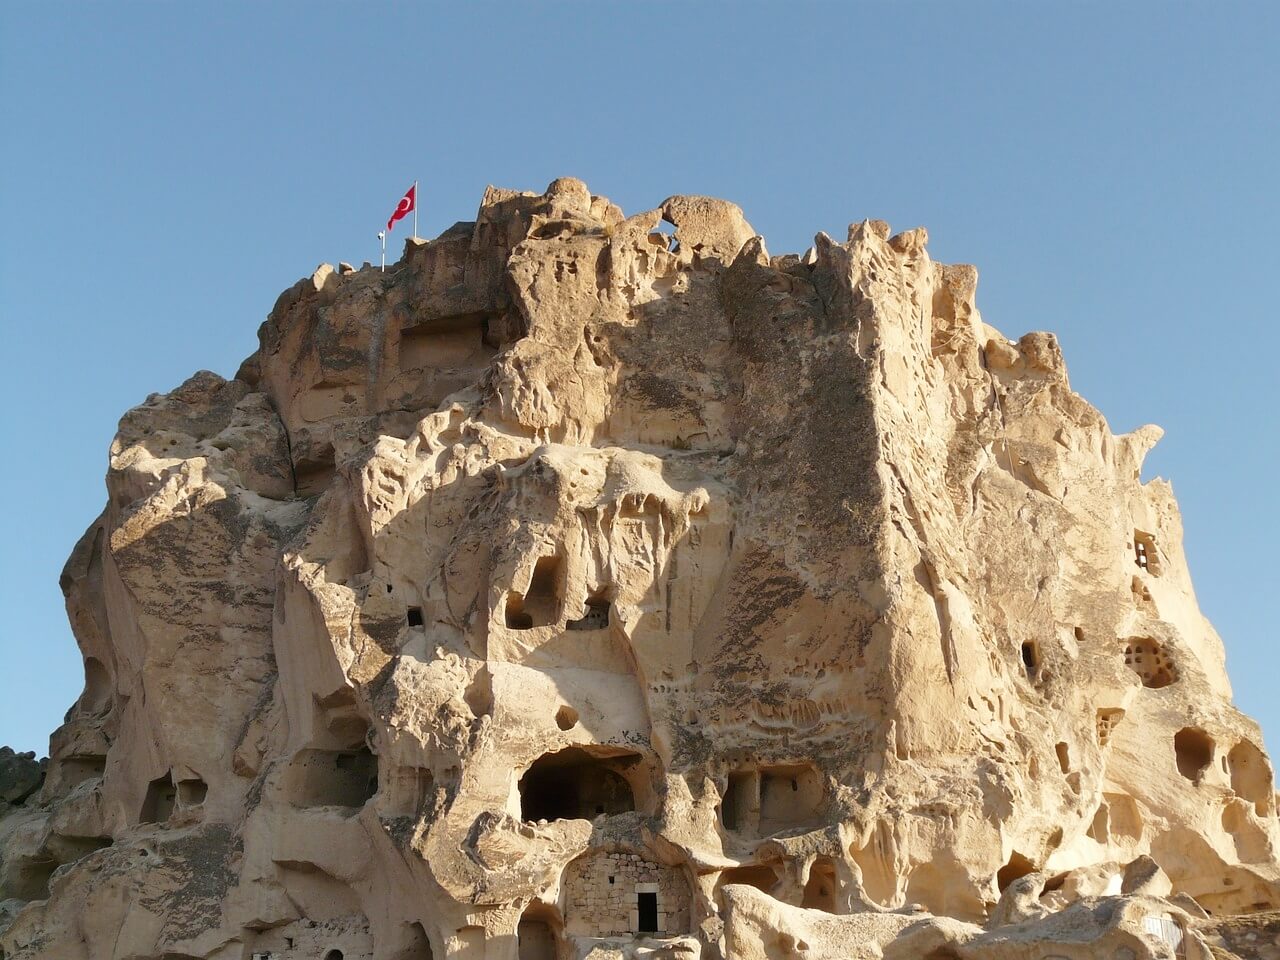 Uchisar Castle is a tall volcanic-rock outcrop situated on the highest point of the small town of Uchisar